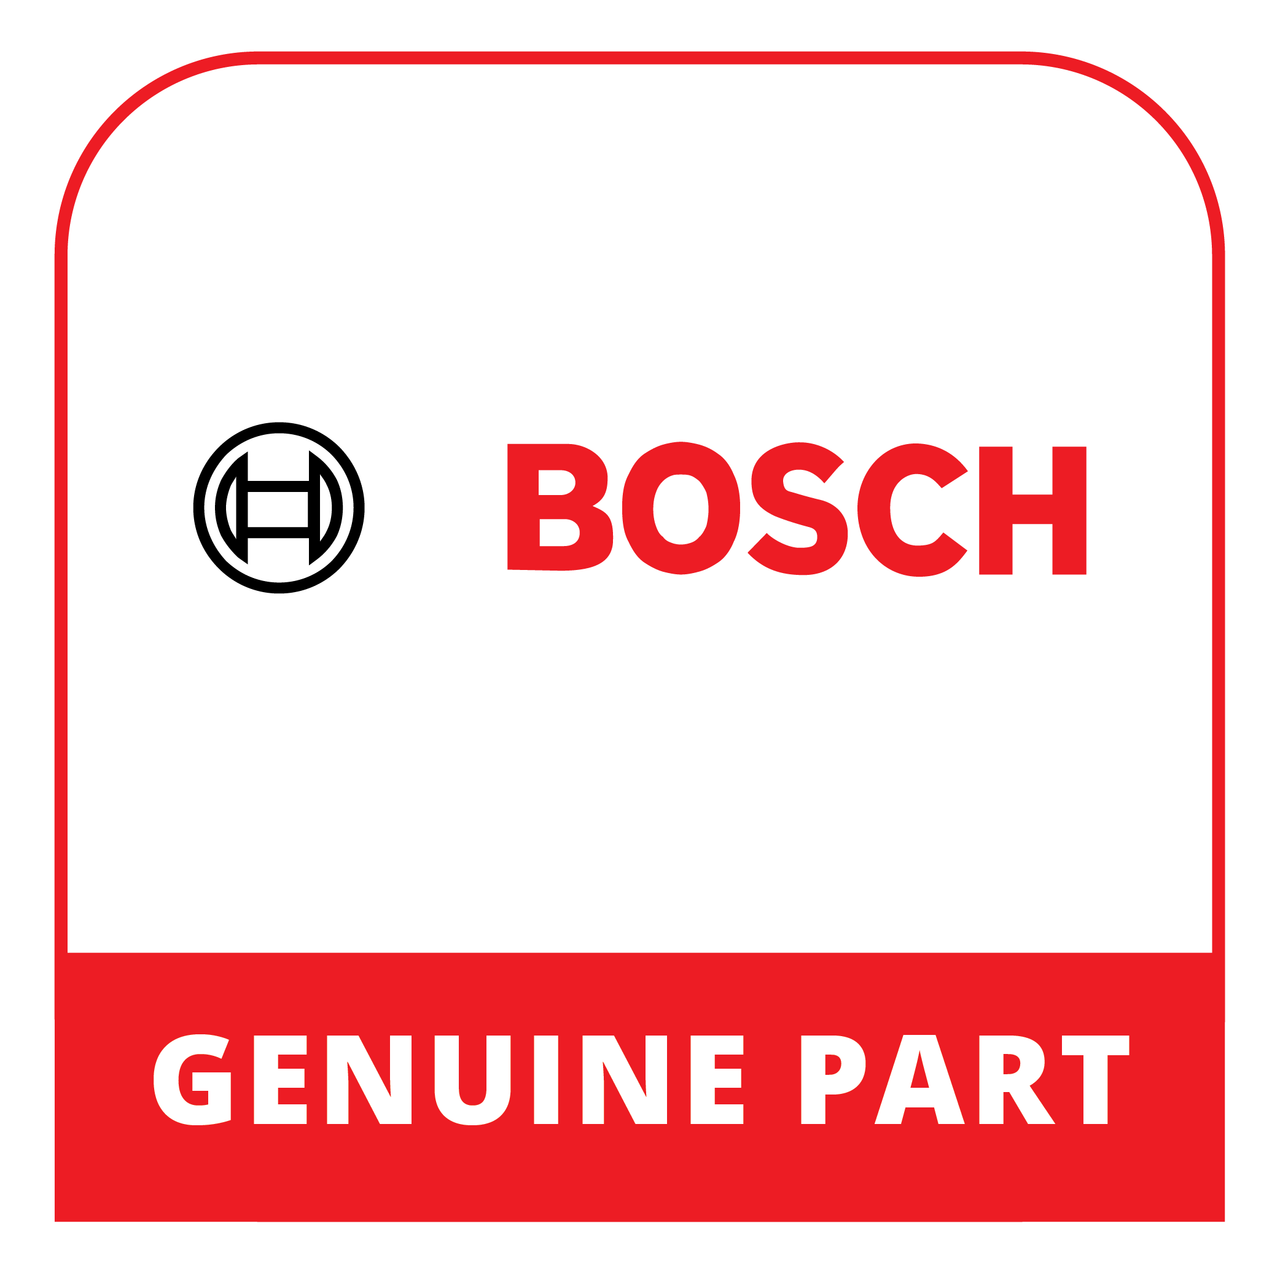 Bosch (Thermador) 20000392 - Panel Side - Genuine Bosch (Thermador) Part